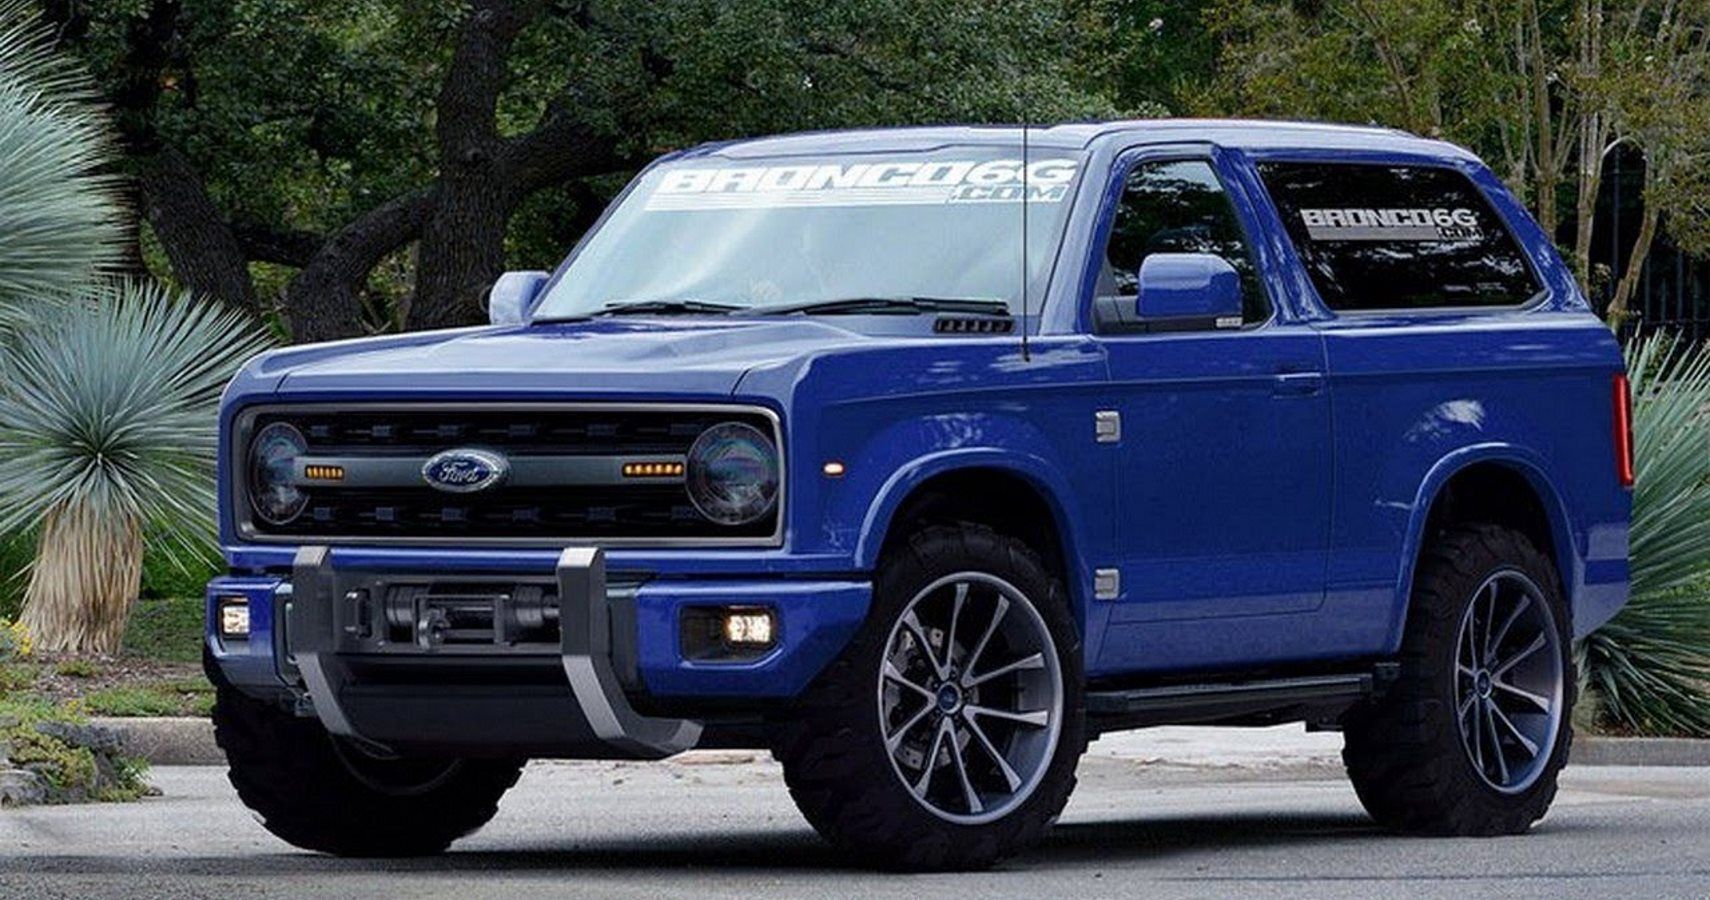 Rumor: 2020 Ford Bronco To Get A 7-Speed Manual Transmission